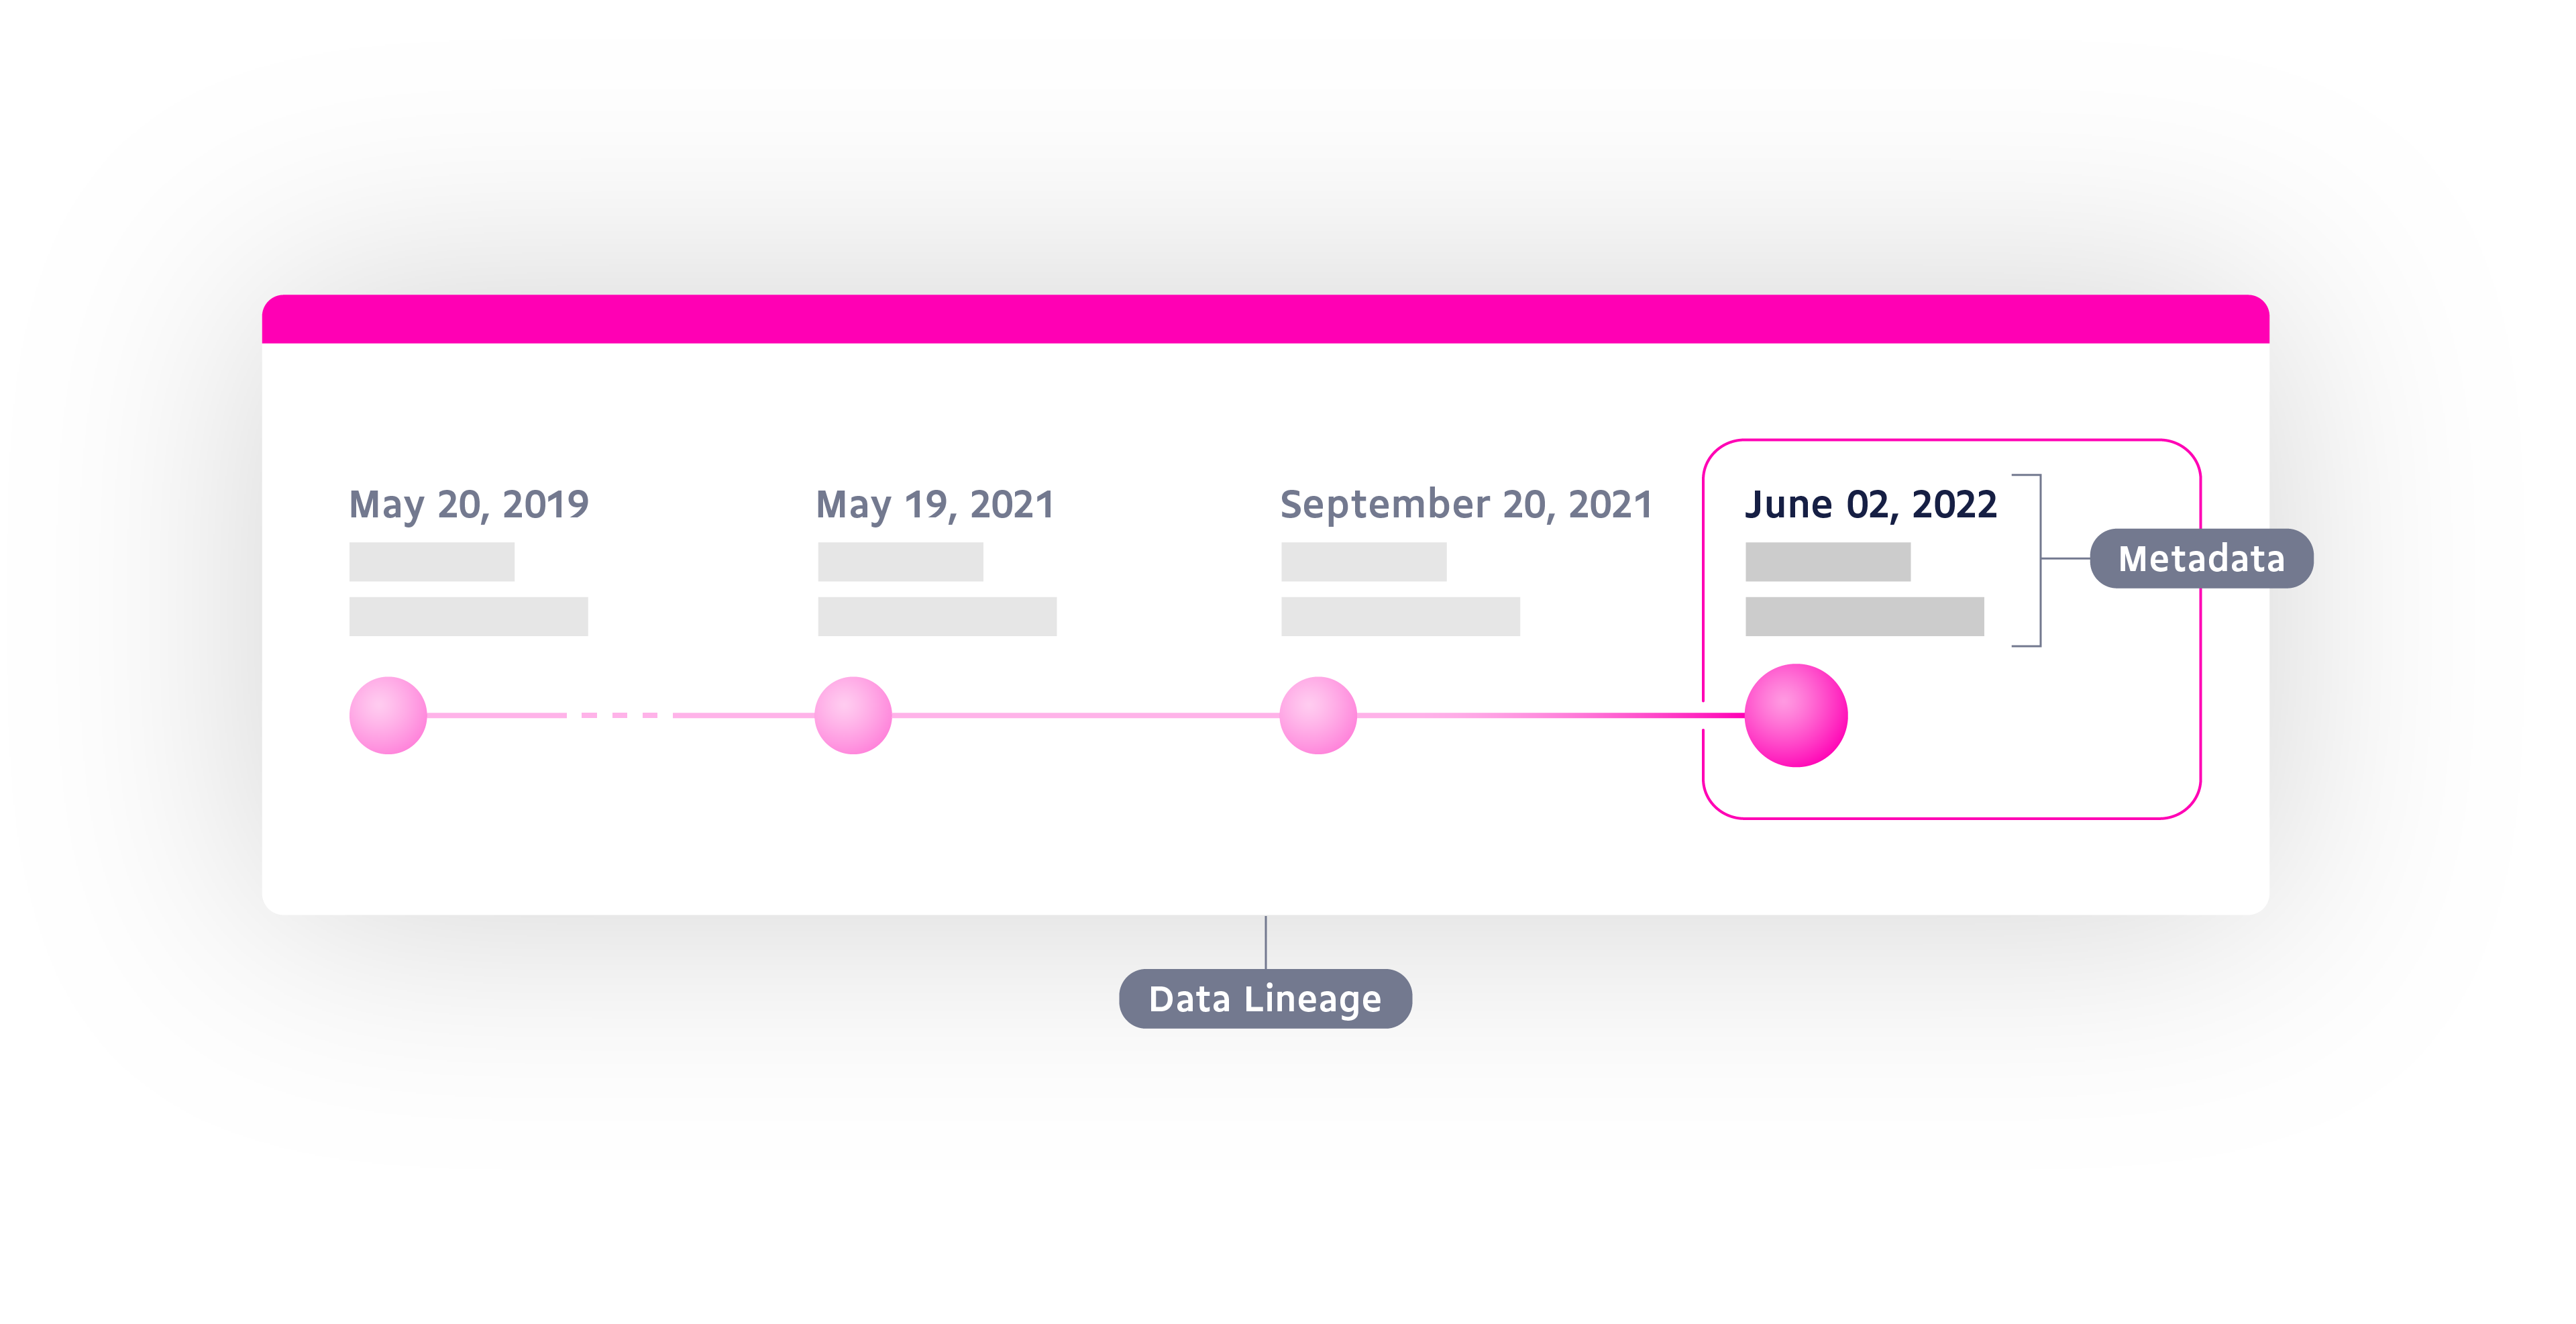 Timeline of events in data lineage